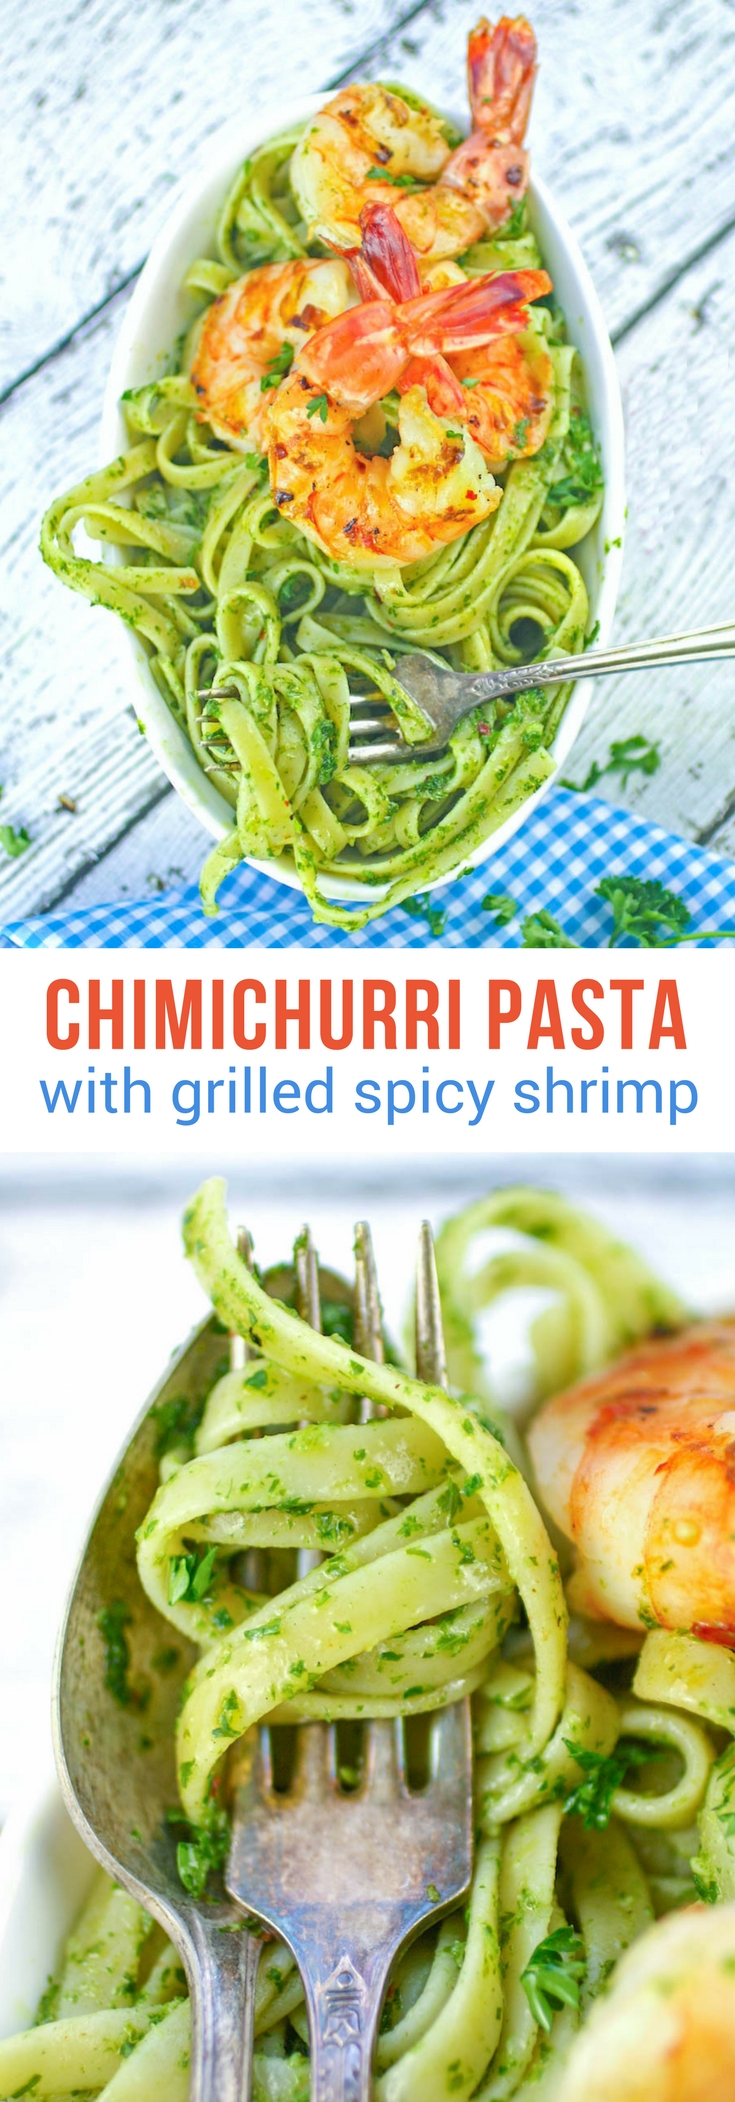 Chimichurri Pasta with Grilled Spicy Shrimp is easy to make and so flavorful. Chimichurri Pasta with Grilled Spicy Shrimp is the perfect dish to help welcome spring, and to serve during Lent, too.